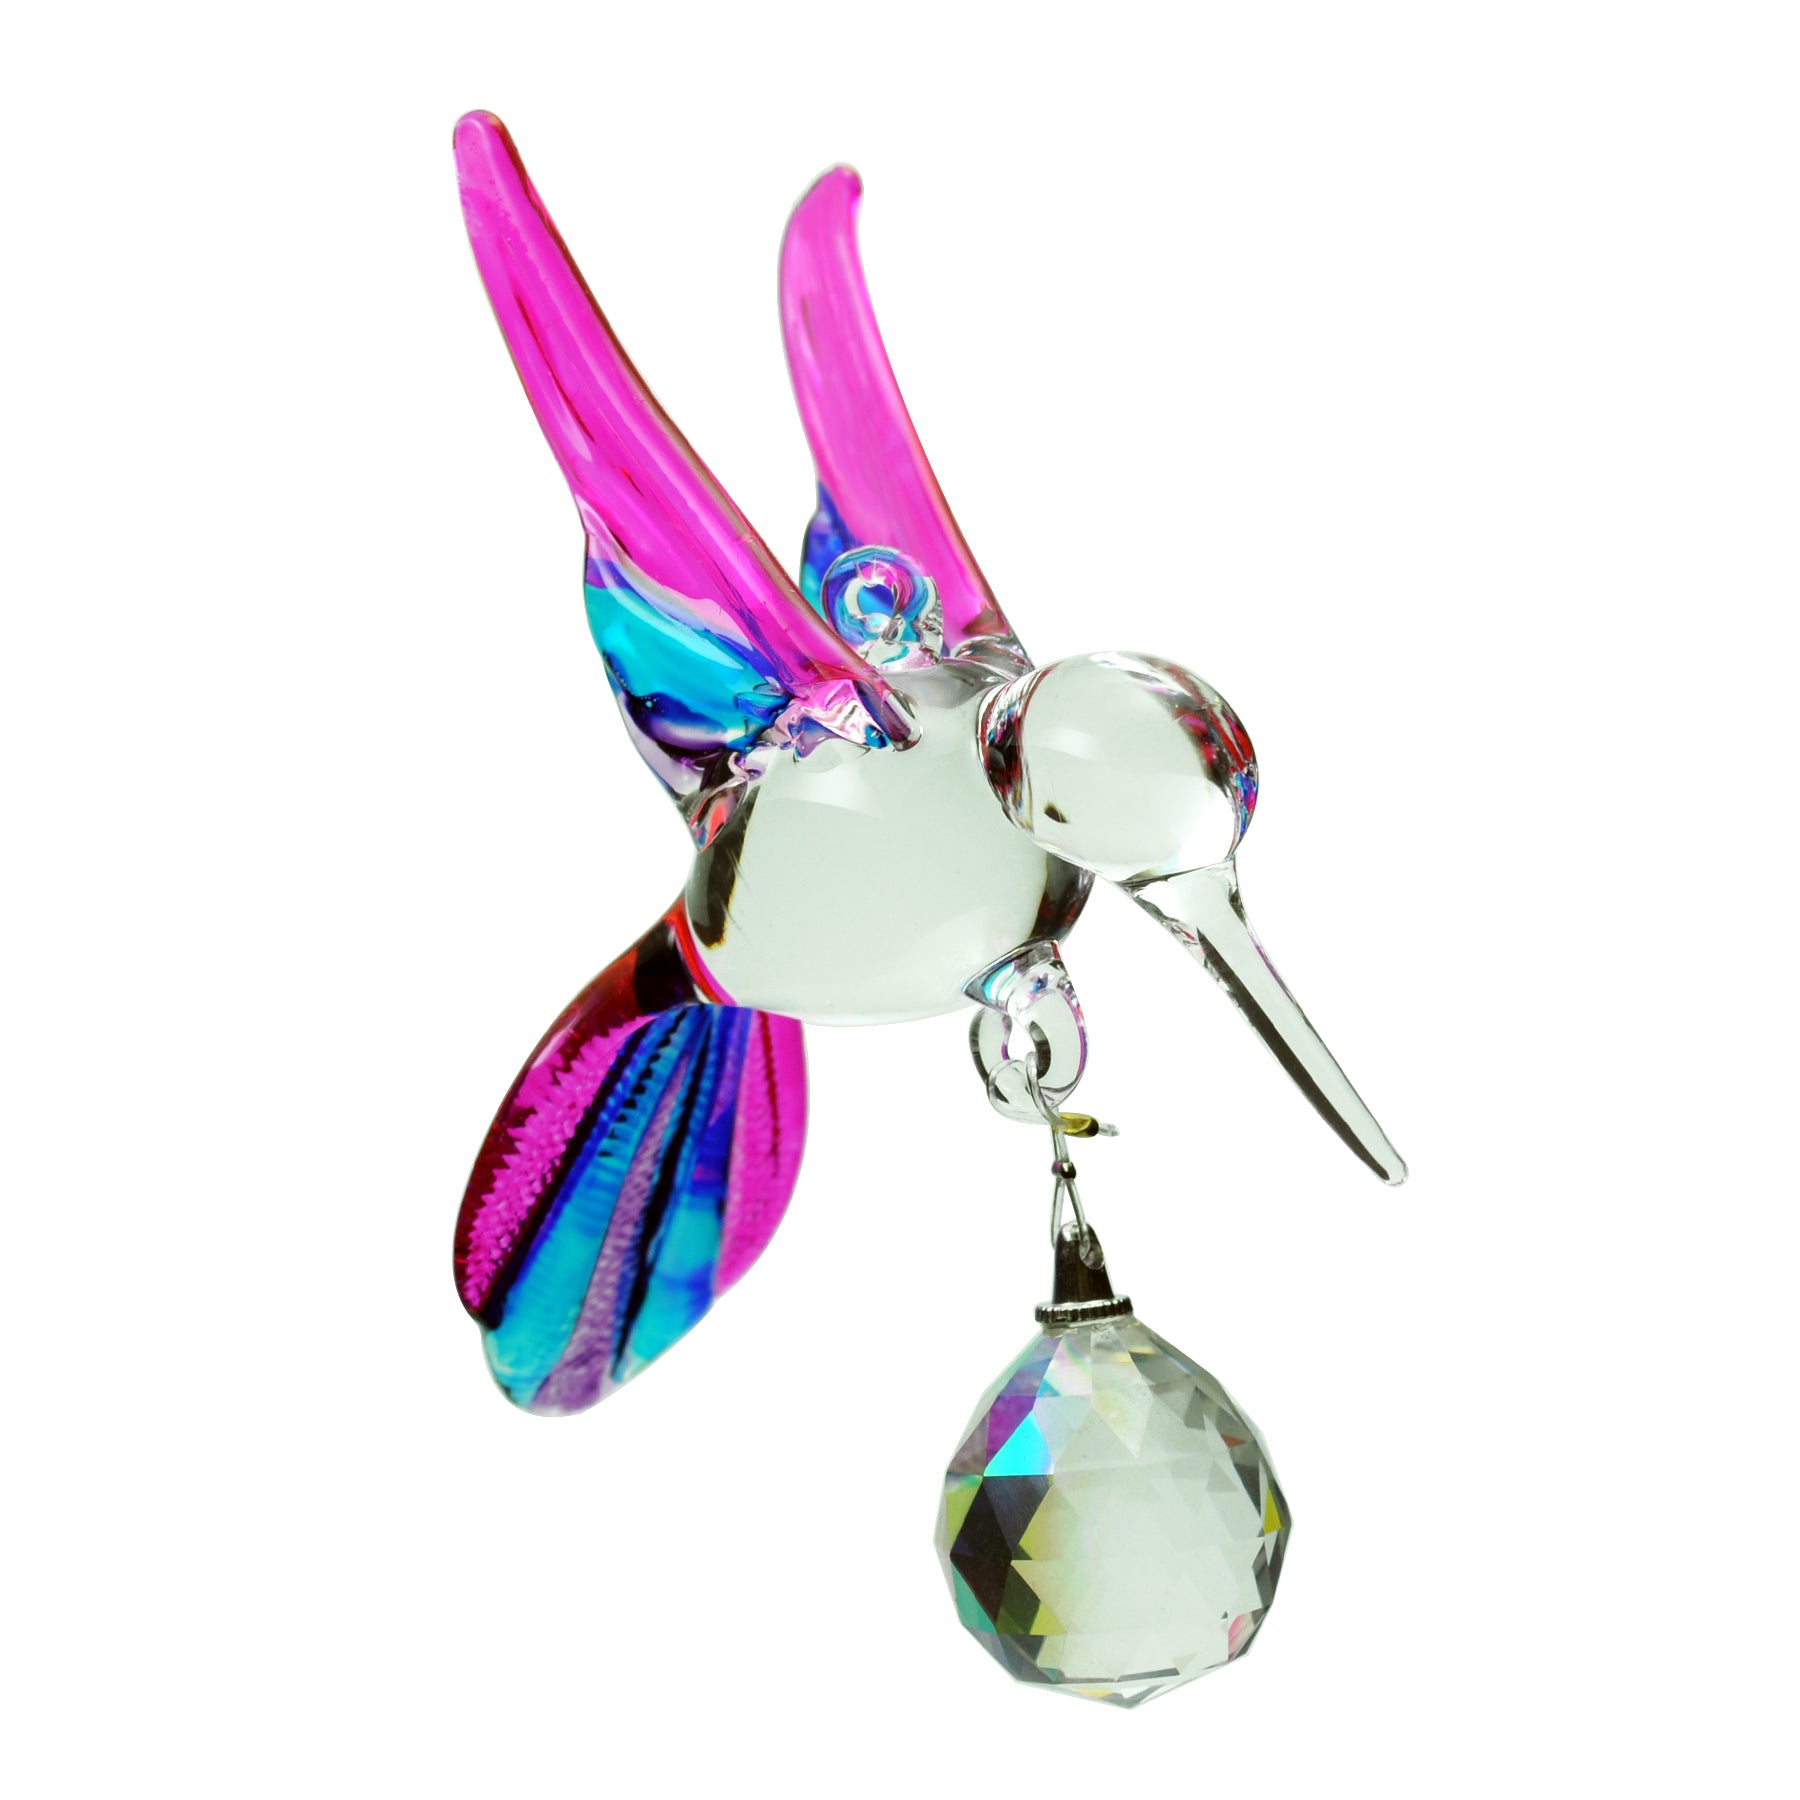 Crystal Castle Glass Multi-Colored Hummingbird ornament in Pink with Blue and Purple accents and a small crystal ball ornament.